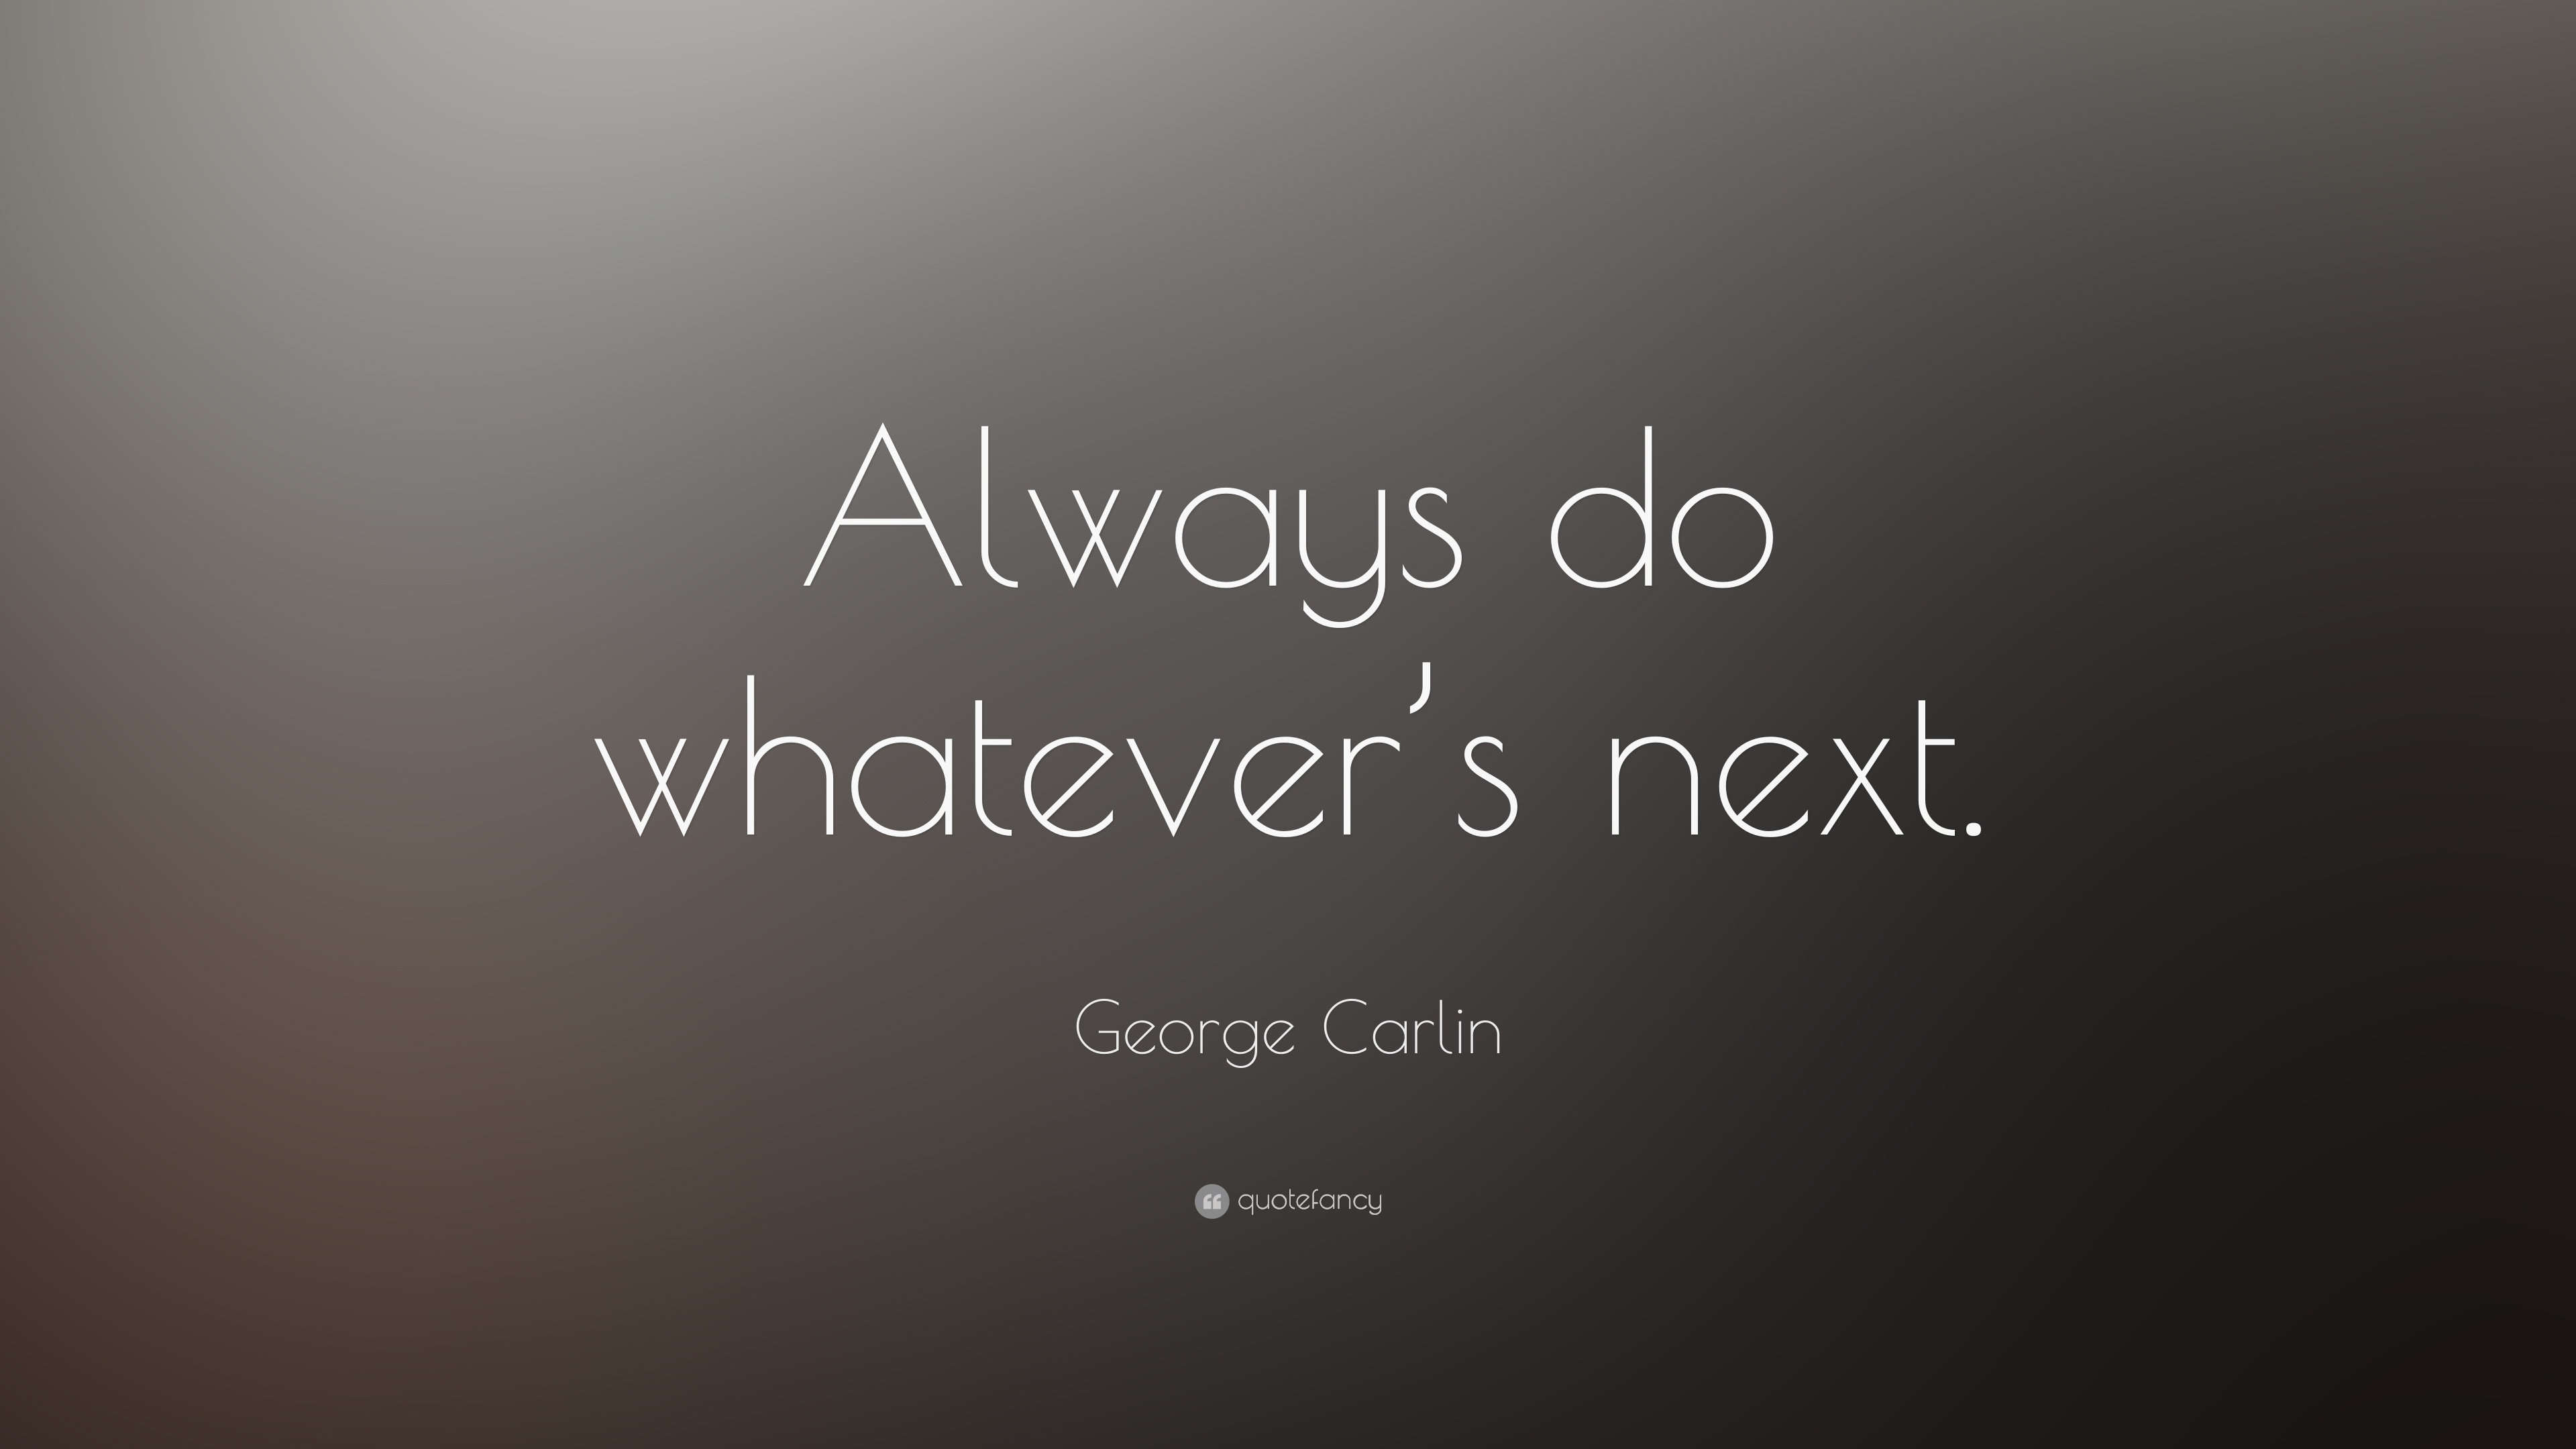 George Carlin Quotes (23 wallpapers) - Quotefancy